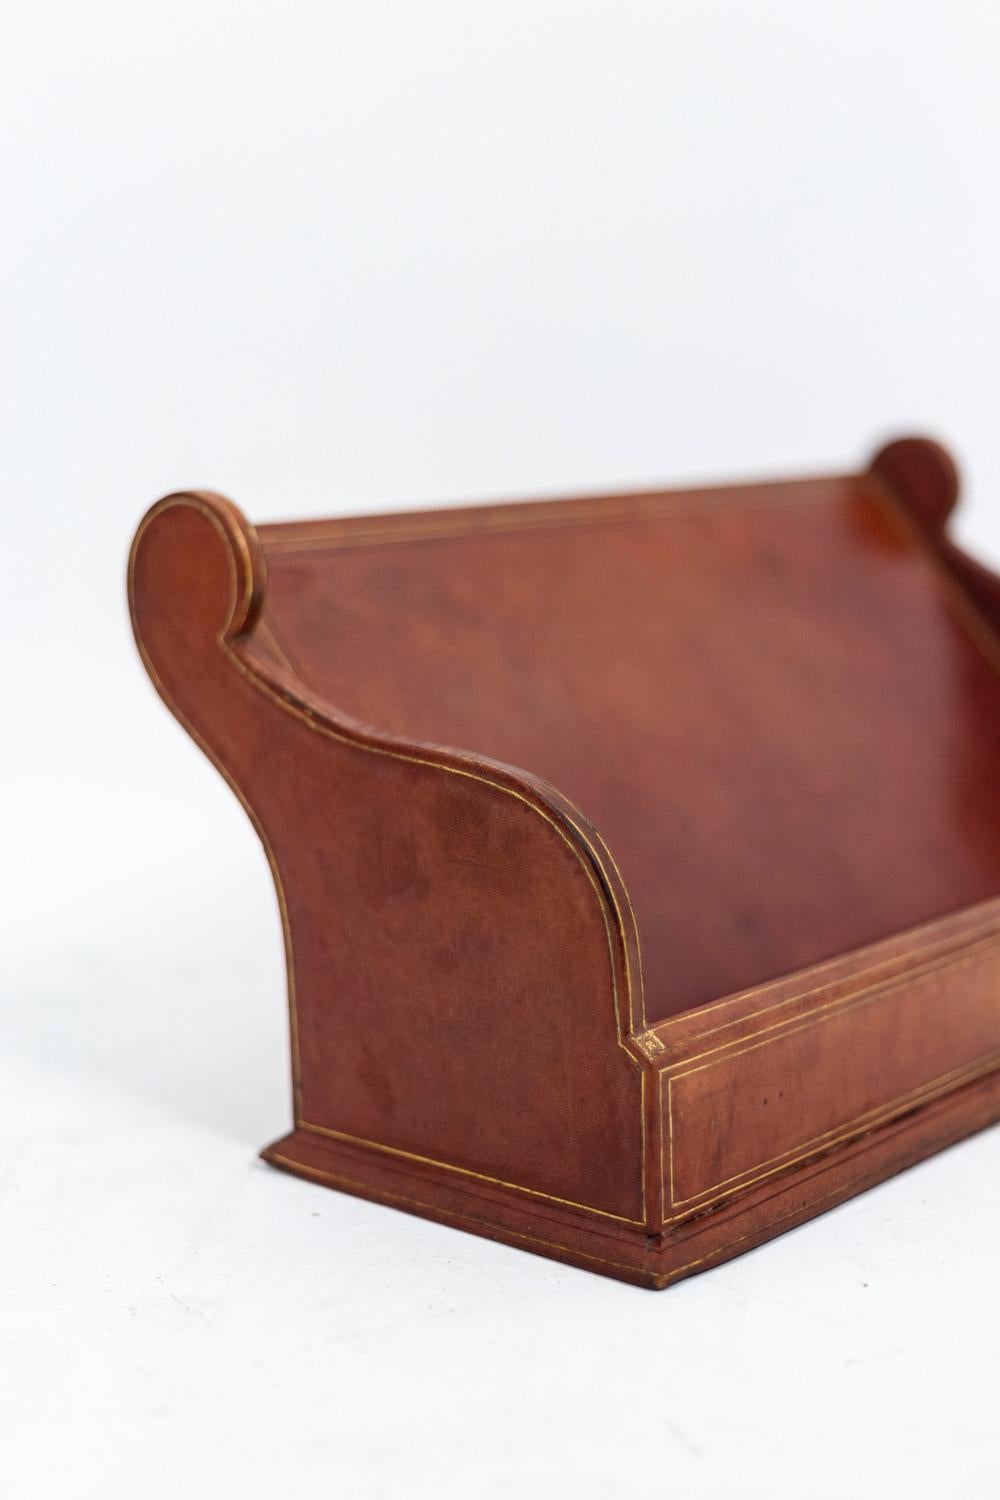 European Letter Holder in Leather, 20th Century For Sale